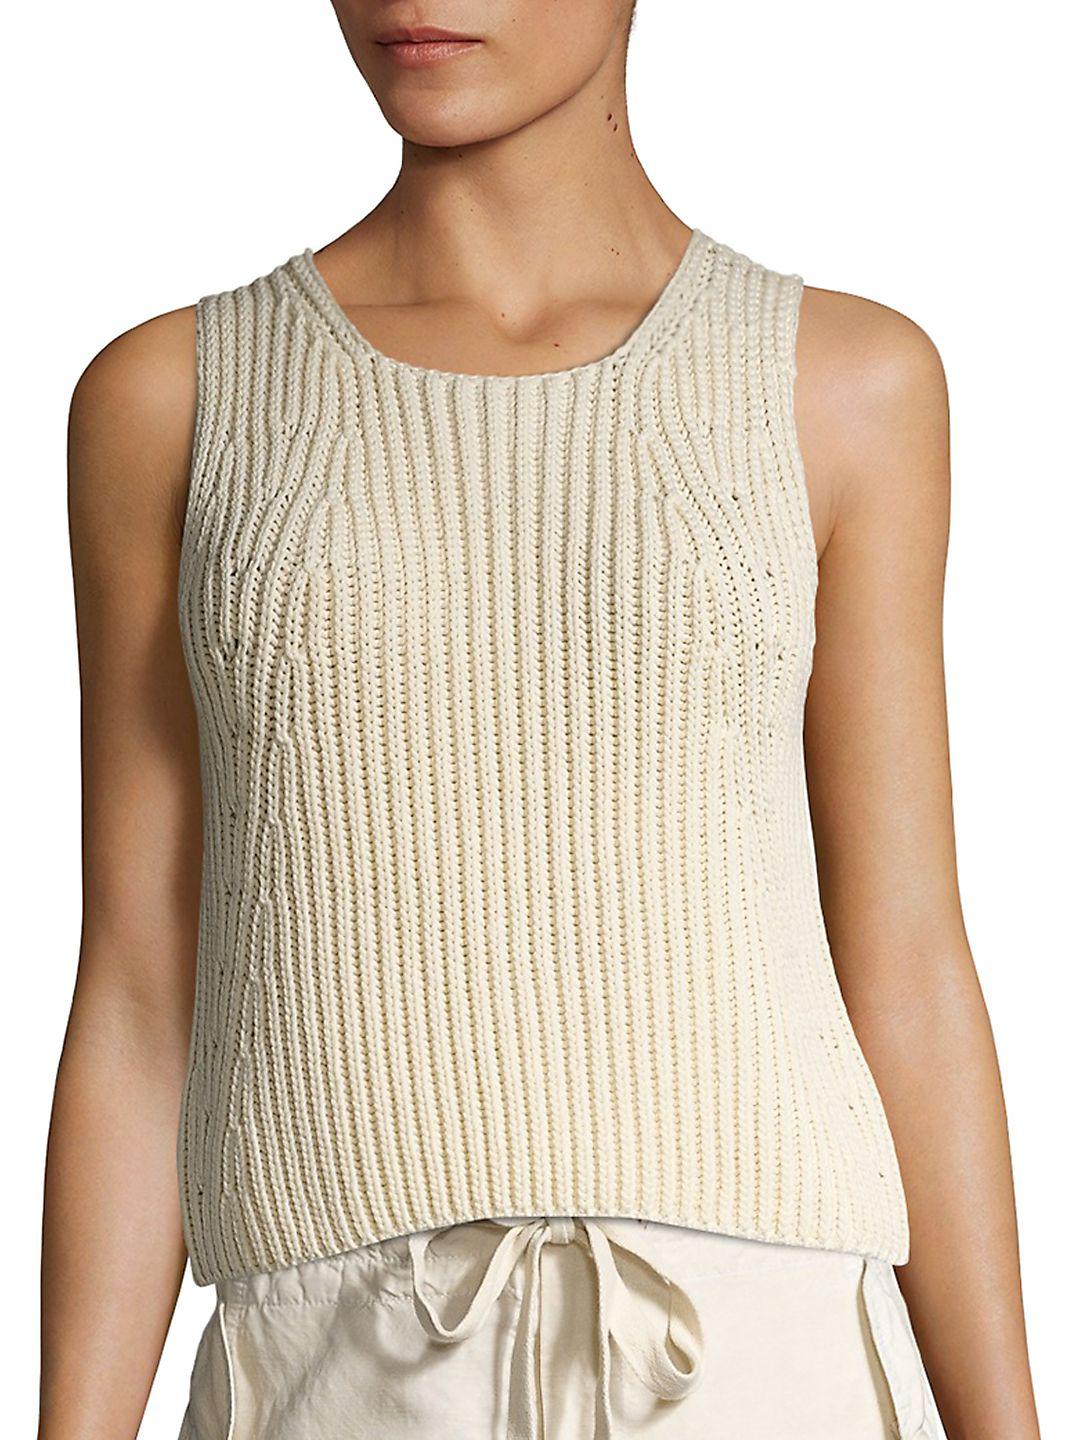 Lyst - Vince Chunky Rib-knit Tank Top in White